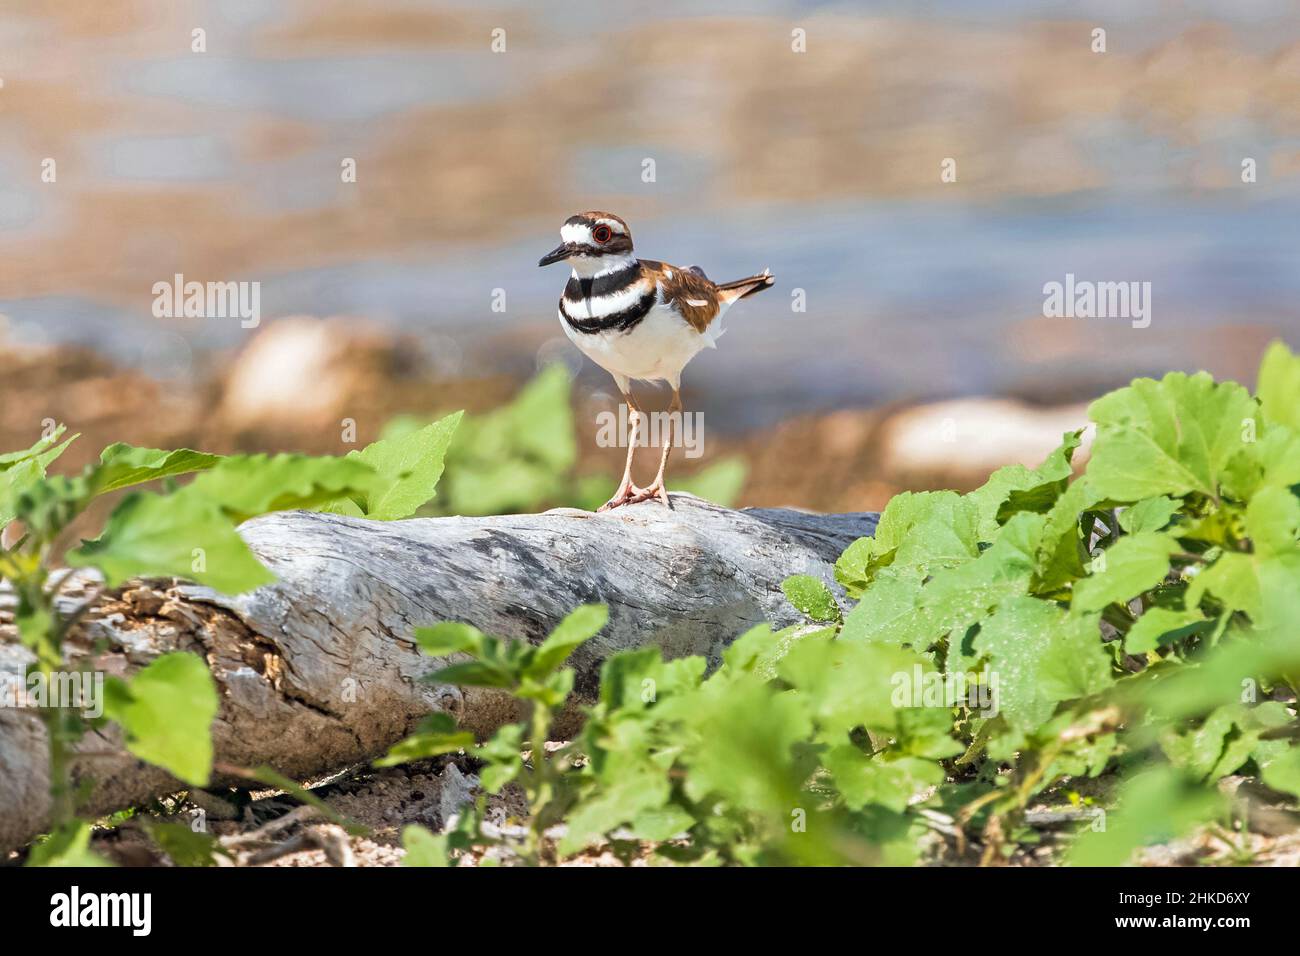 A Killdeer bird standing atop a fallen tree trunk surrounded by green plants that grow in the sandy part of the lake's ecosystem. Stock Photo